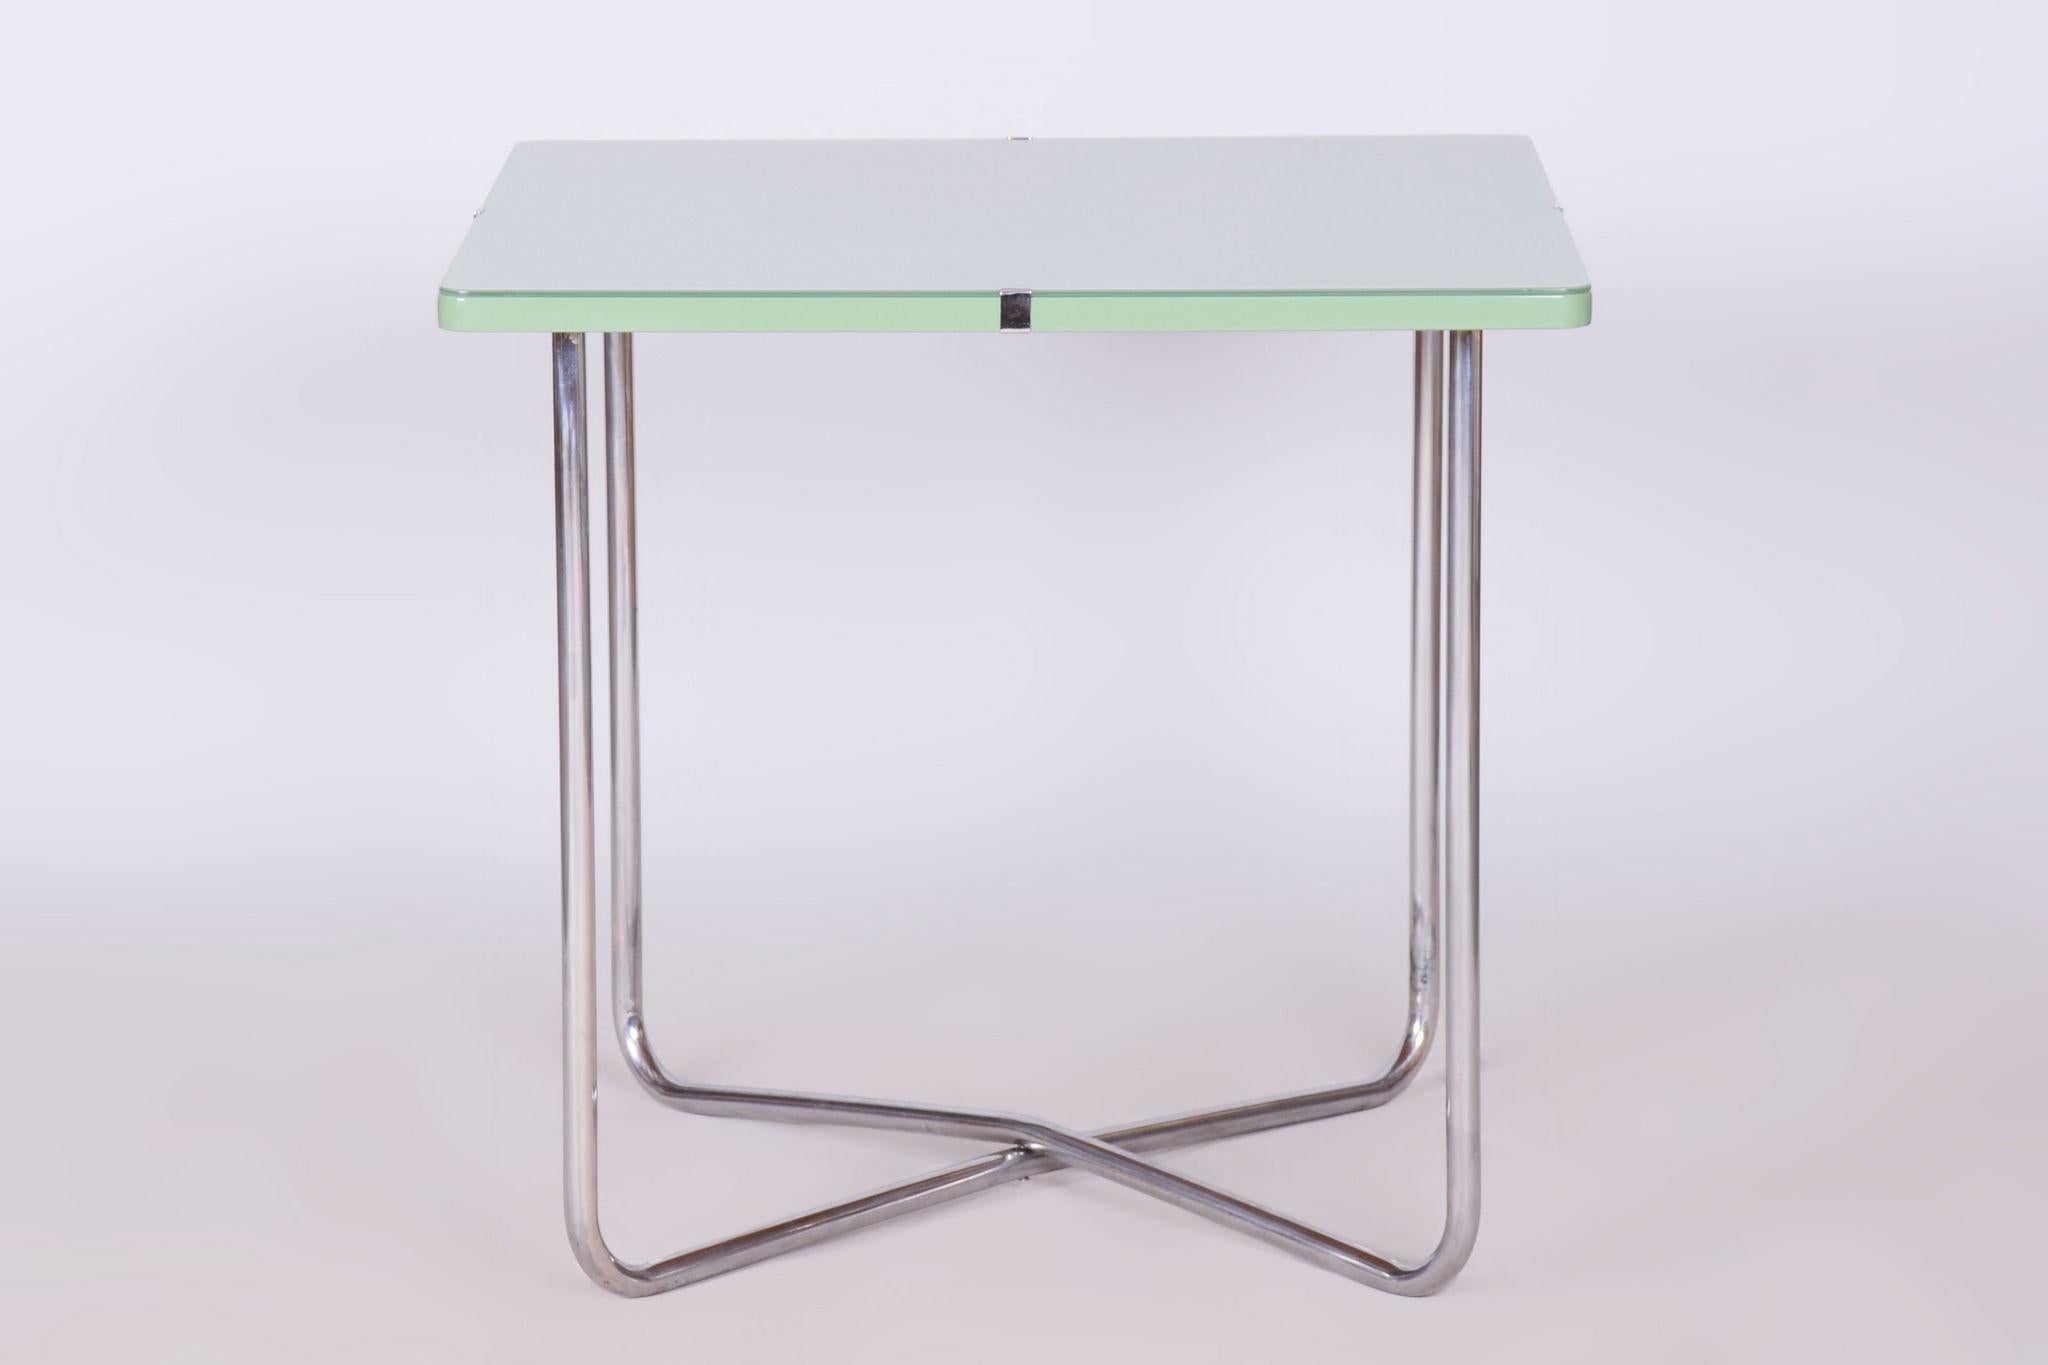 Made by Hynek Gottwald, a company credited with being the pioneers of metal furniture. 

Our professional refurbishing team in Czechia has fully restored it according to the original process. 

The chrome parts have been cleaned and professionally